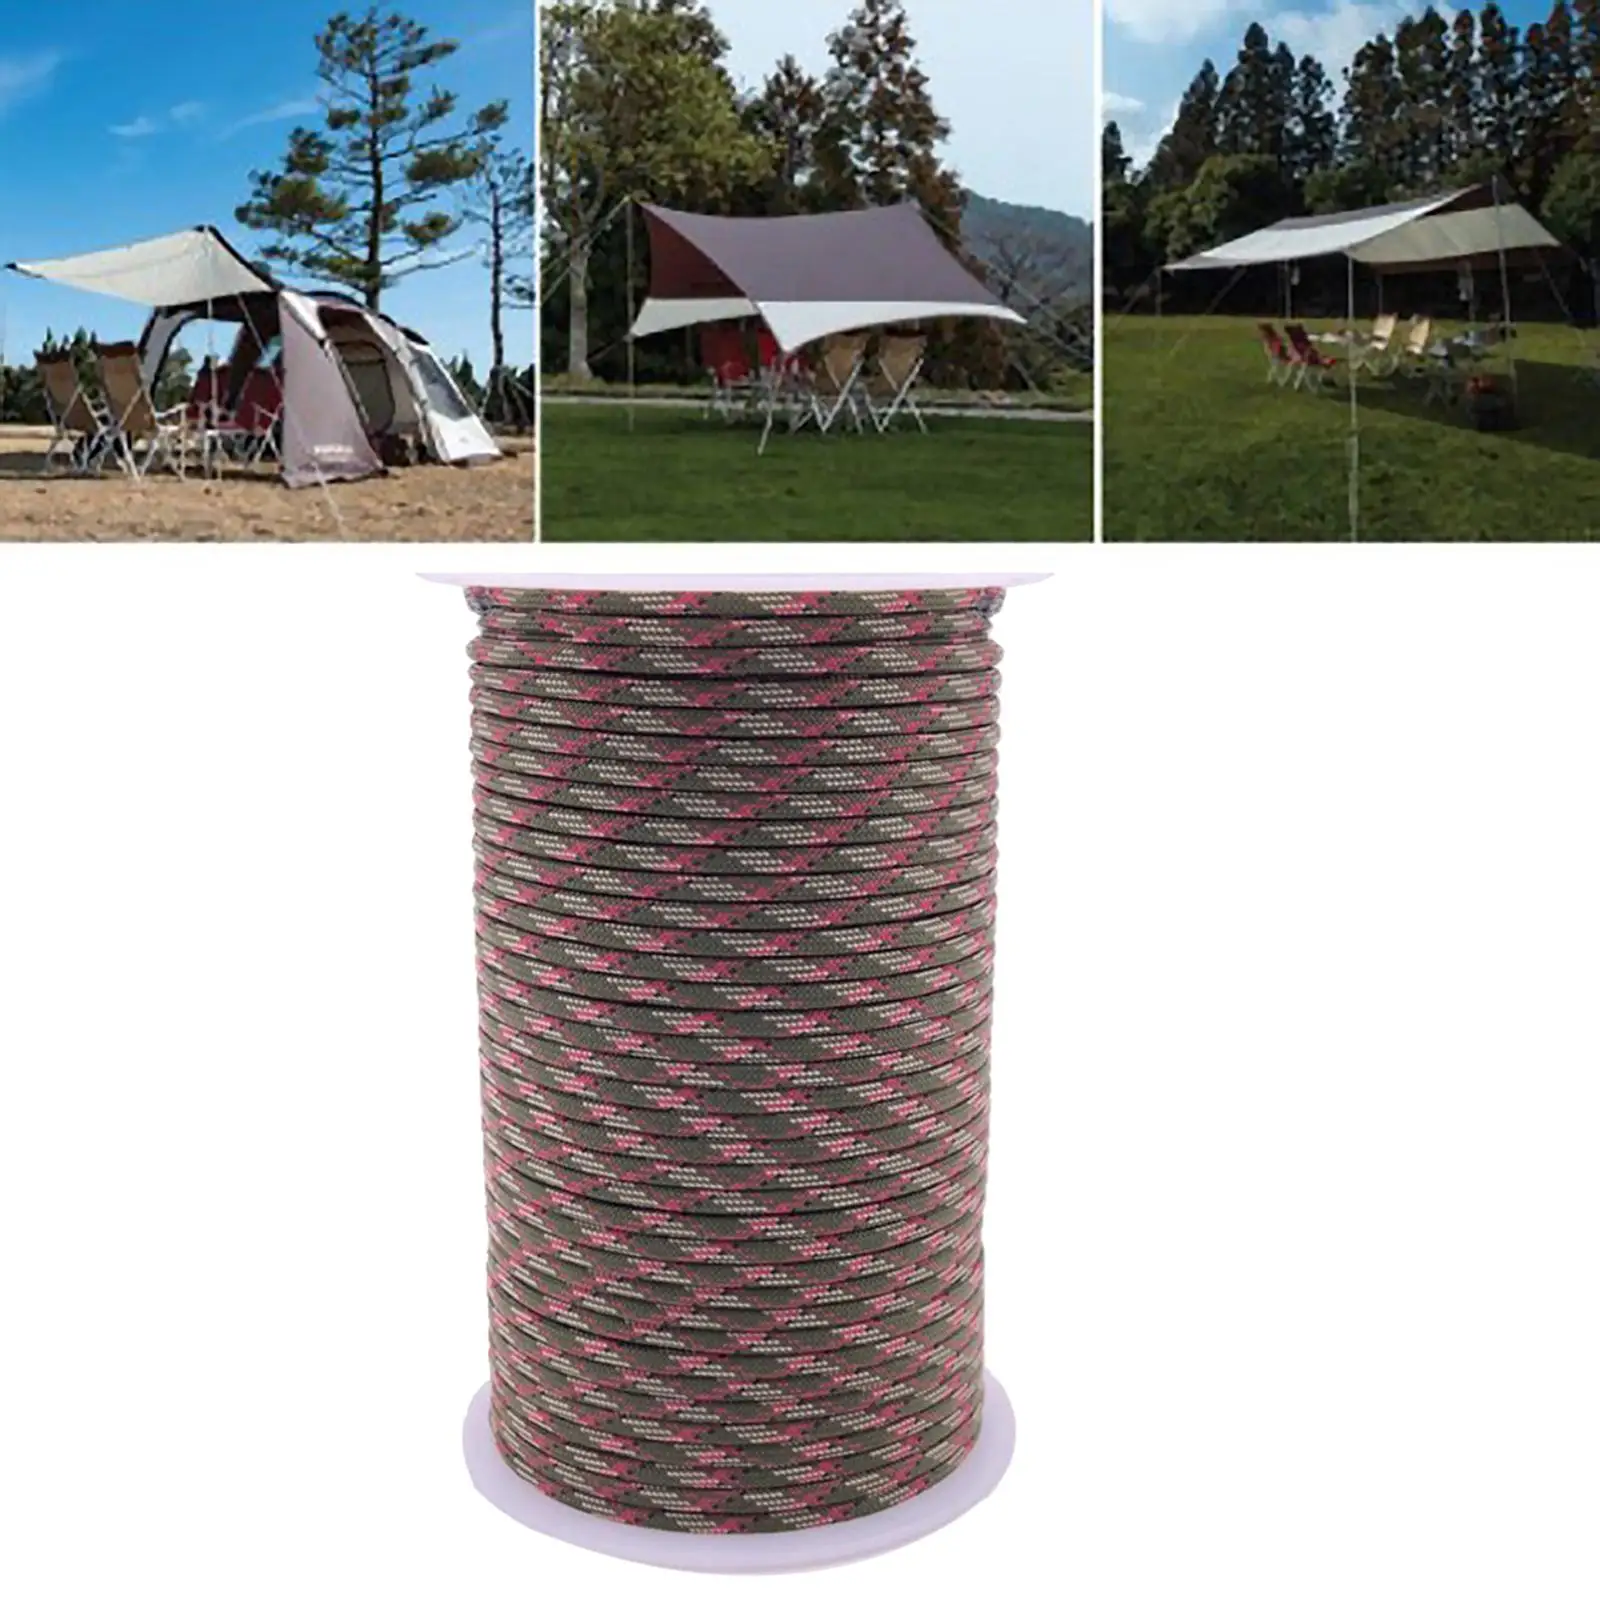 Paracordaaa Cord 550 Multifunction Paracordaaa Ropes 328 Feet, Tent Rope Parachute Cord Outdoor Survival Rope Making